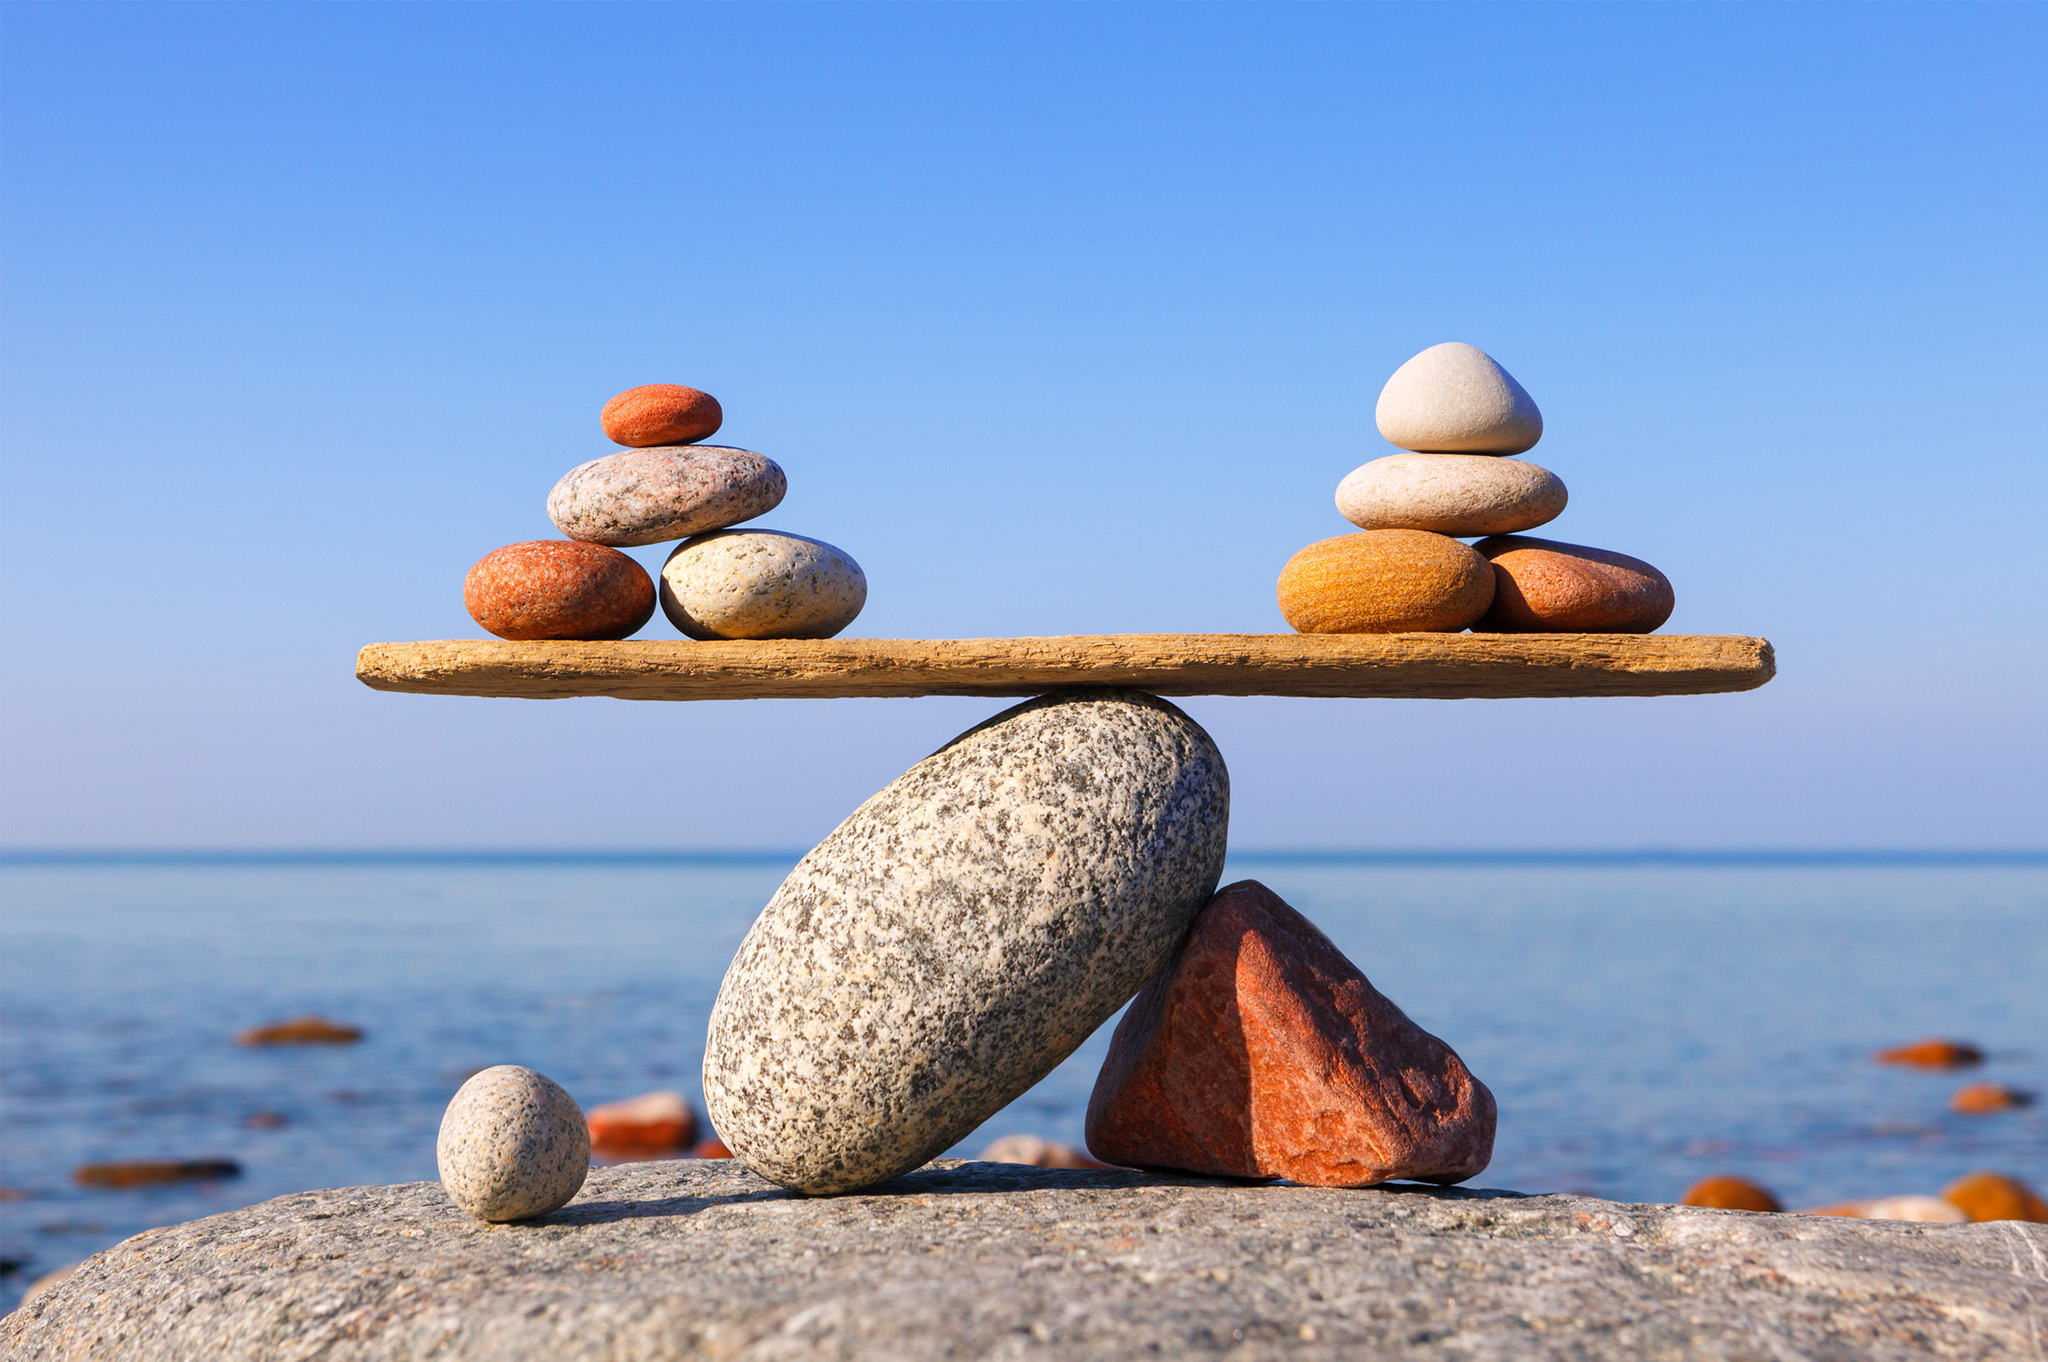 image of beach rocks balancing with ocean in background